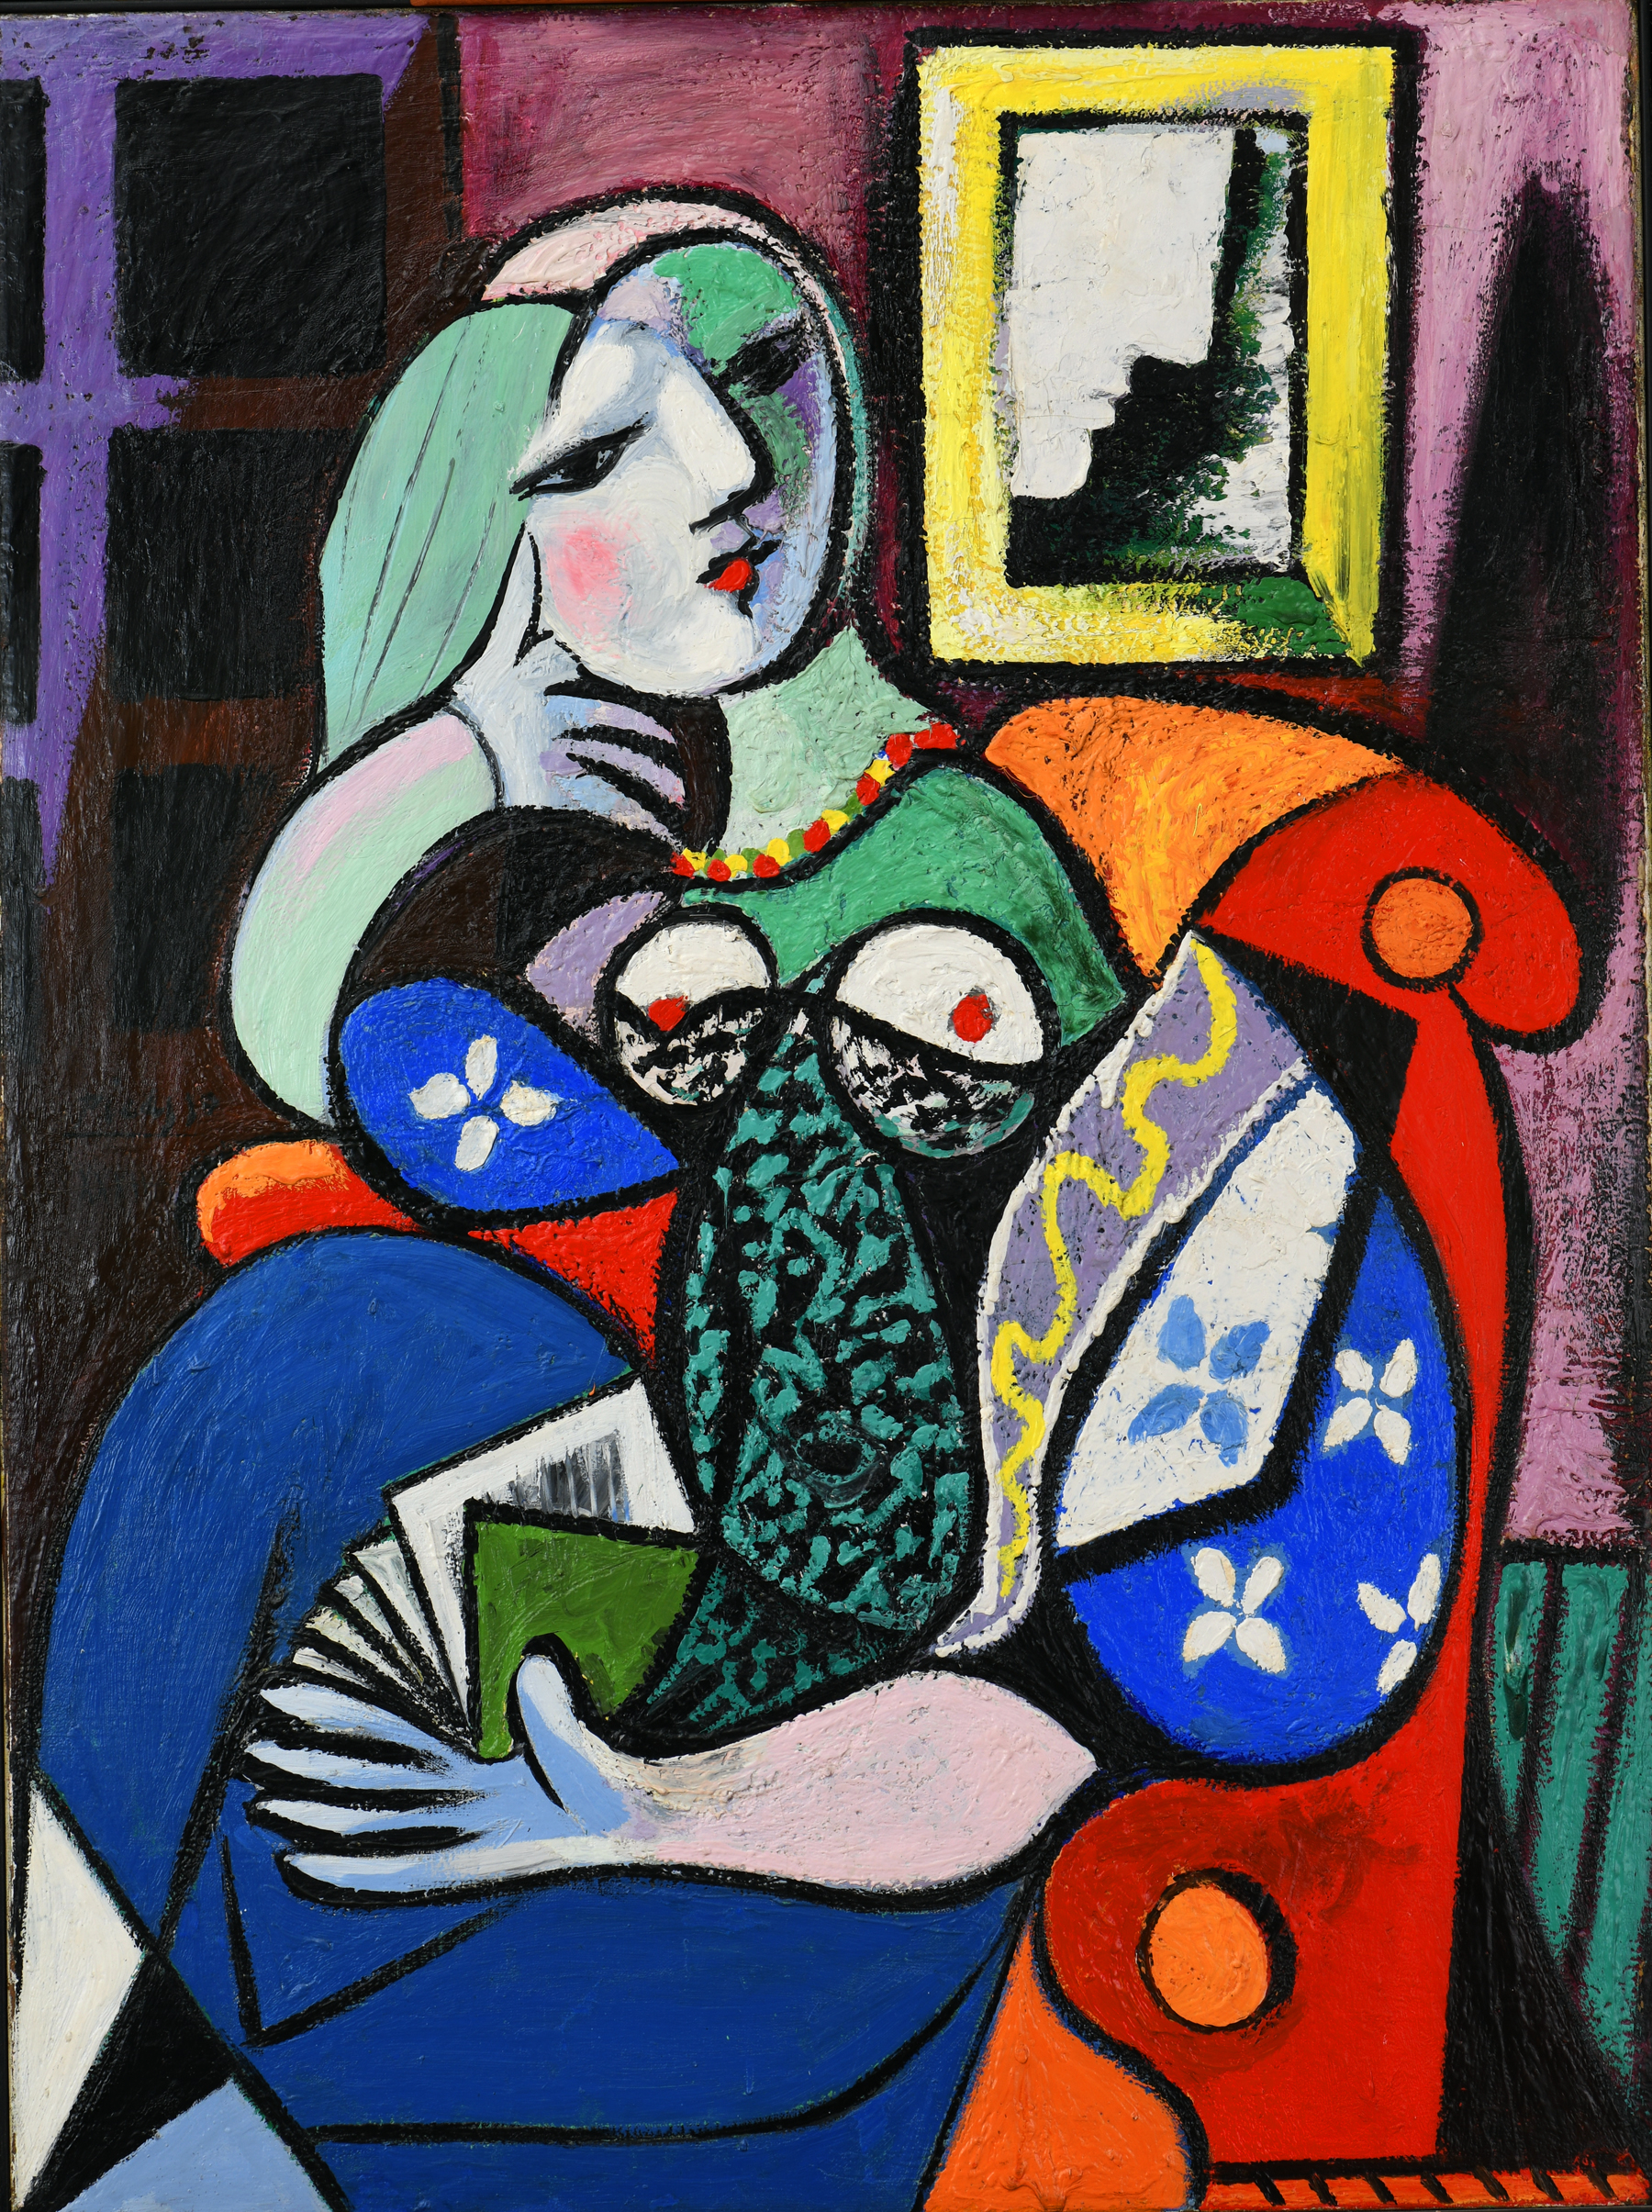 Pablo Picasso (Spanish, 1881–1973), ‘Woman with a Book,’ 1932. Oil on canvas, 51 3/8 by 38 1/2in. (130.5 by 97.8cm). The Norton Simon Foundation. © 2022 Estate of Pablo Picasso / Artists Rights Society (ARS), New York 